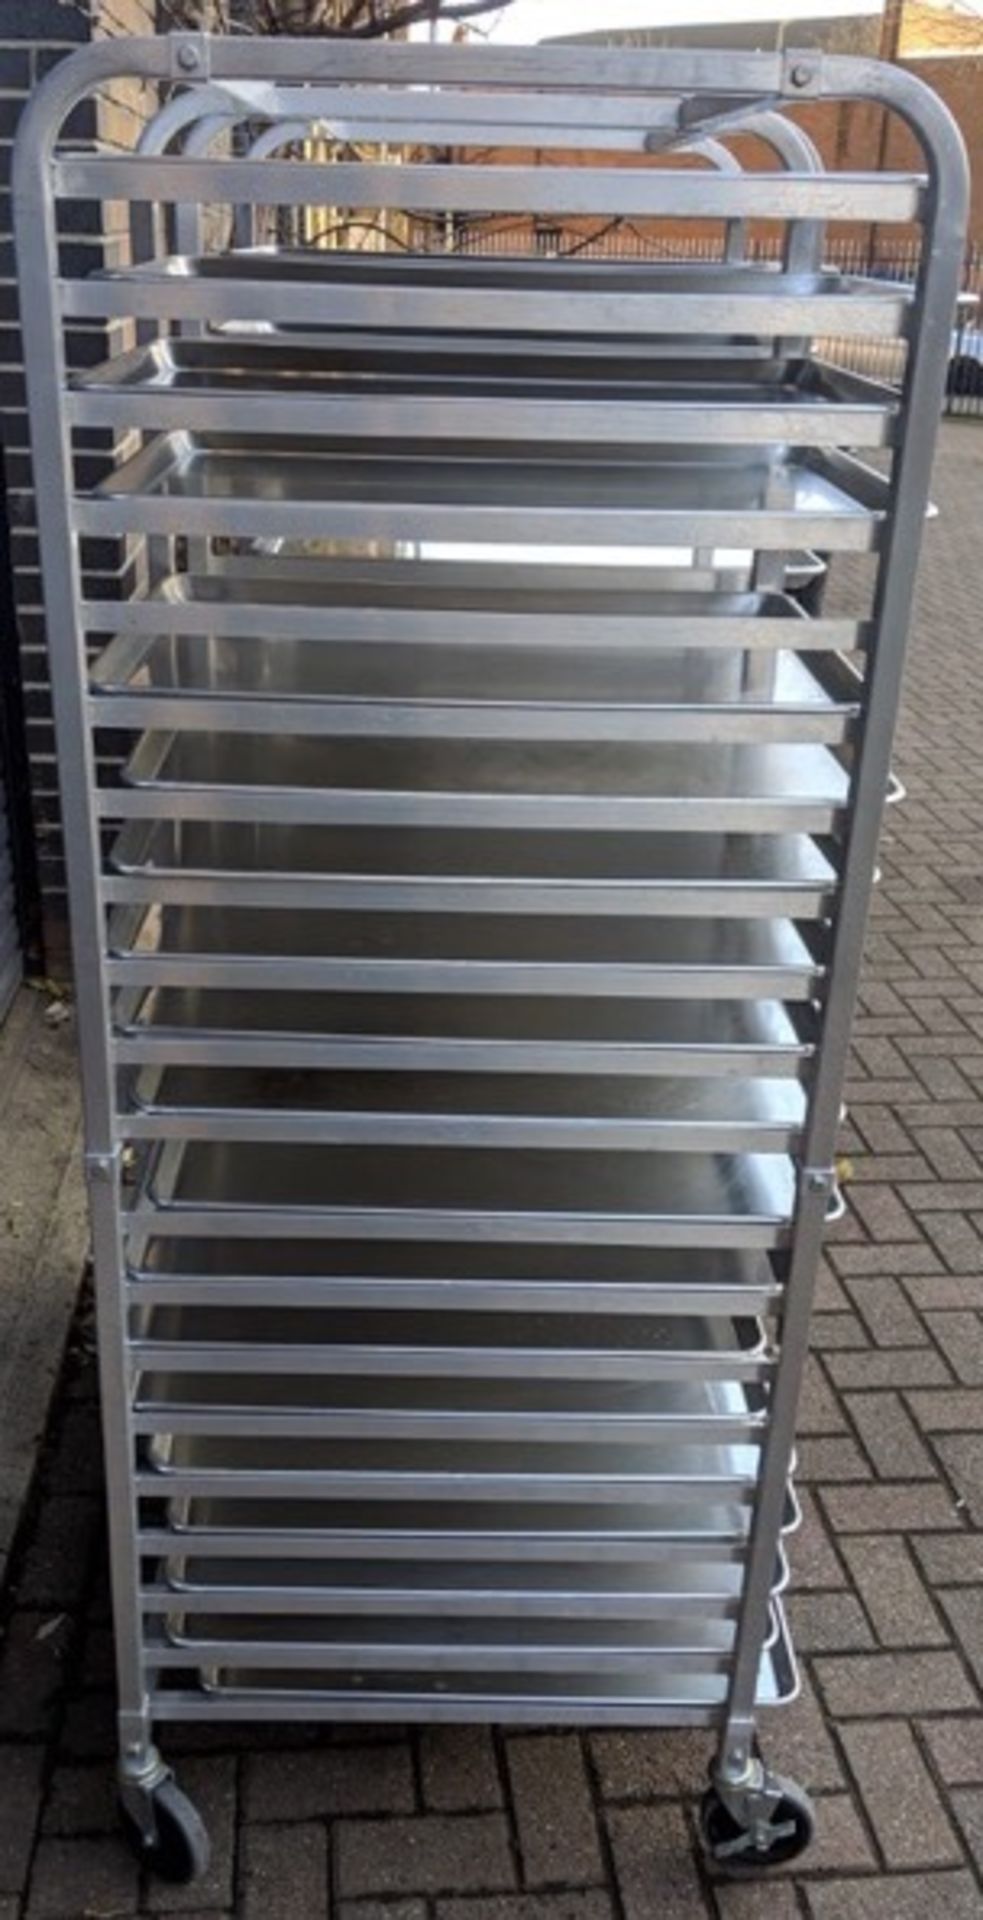 2 x Racks, with approx. 20 trays per rack. Approx 52cm wide x 66cm deep x 175cm high. - Image 3 of 3